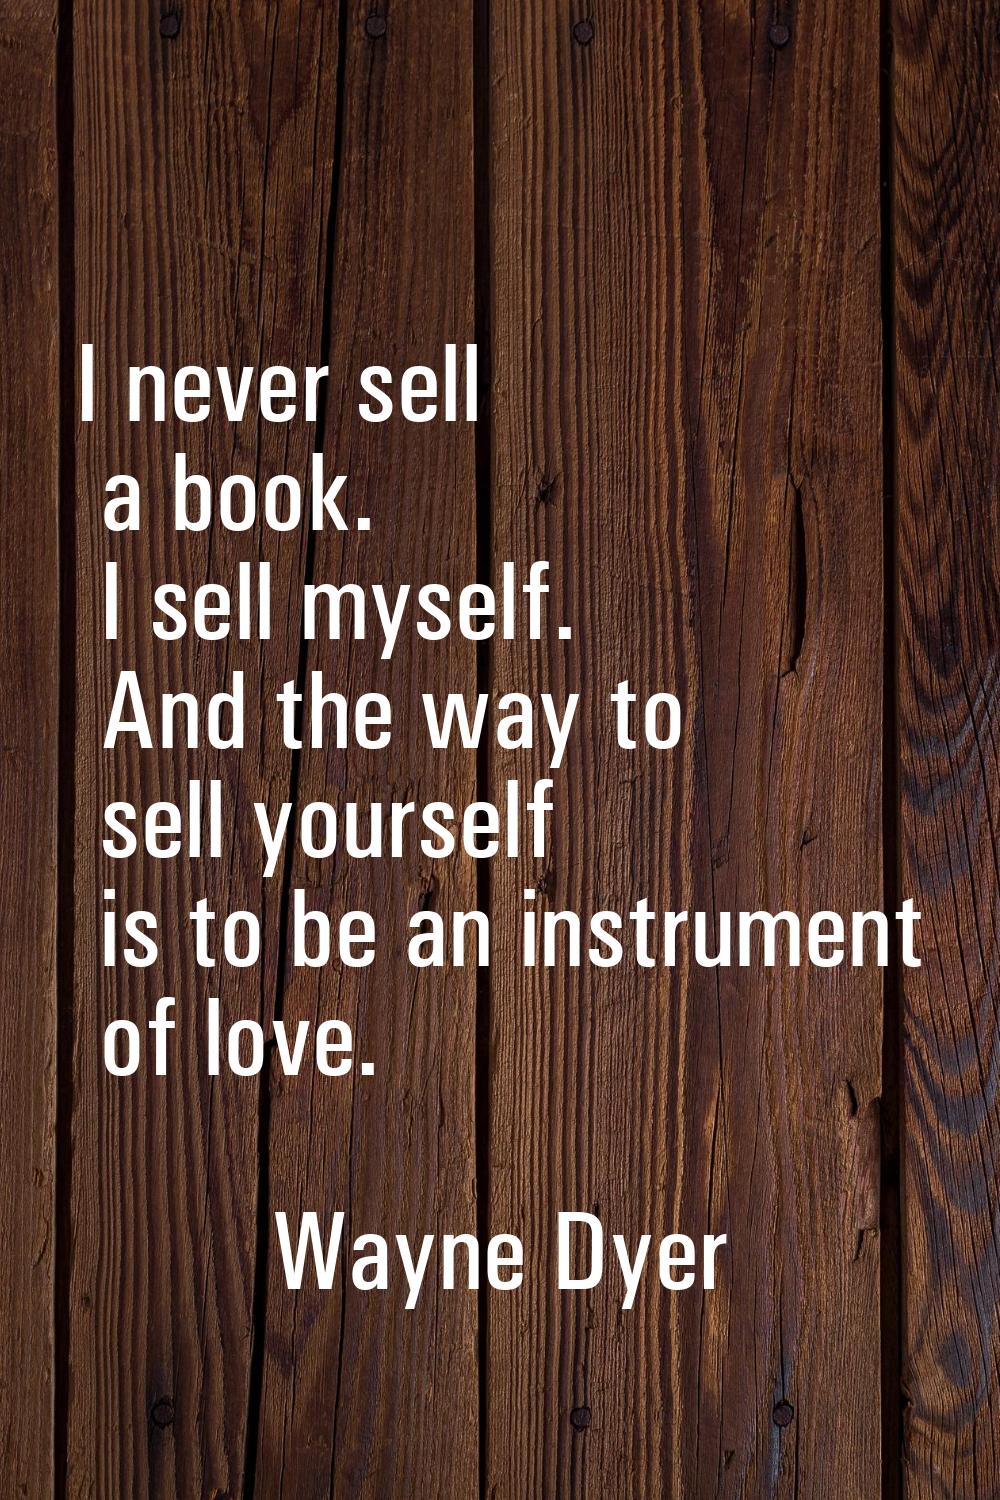 I never sell a book. I sell myself. And the way to sell yourself is to be an instrument of love.